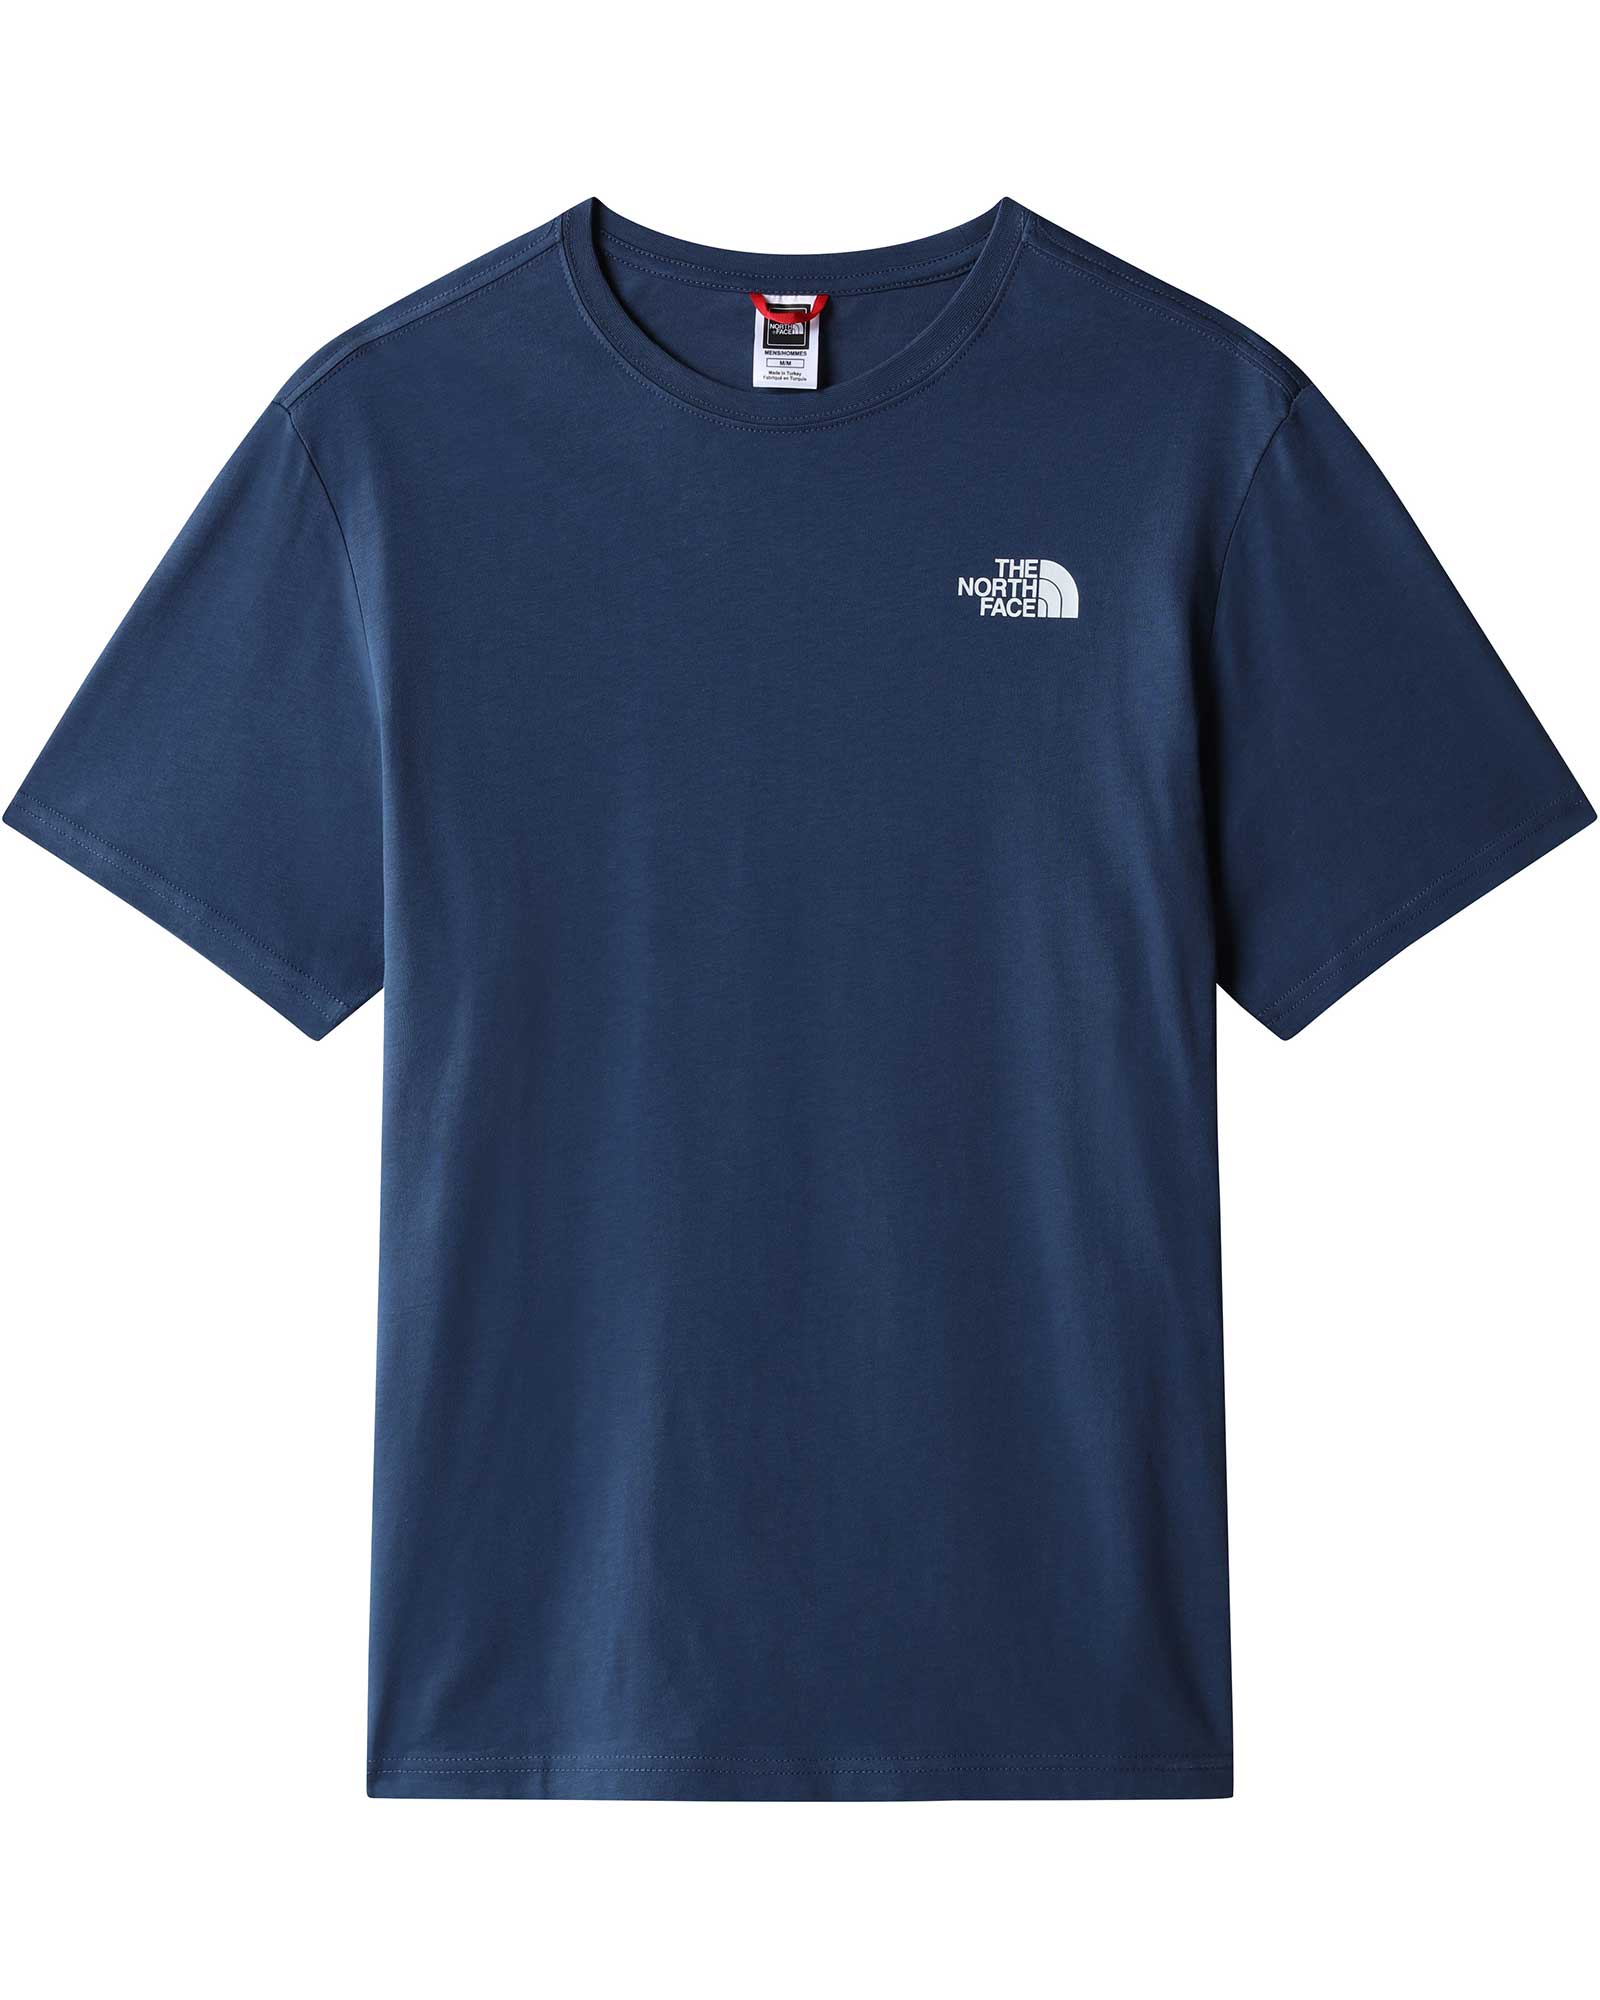 The North Face Red Box Men’s T Shirt - Shady Blue S